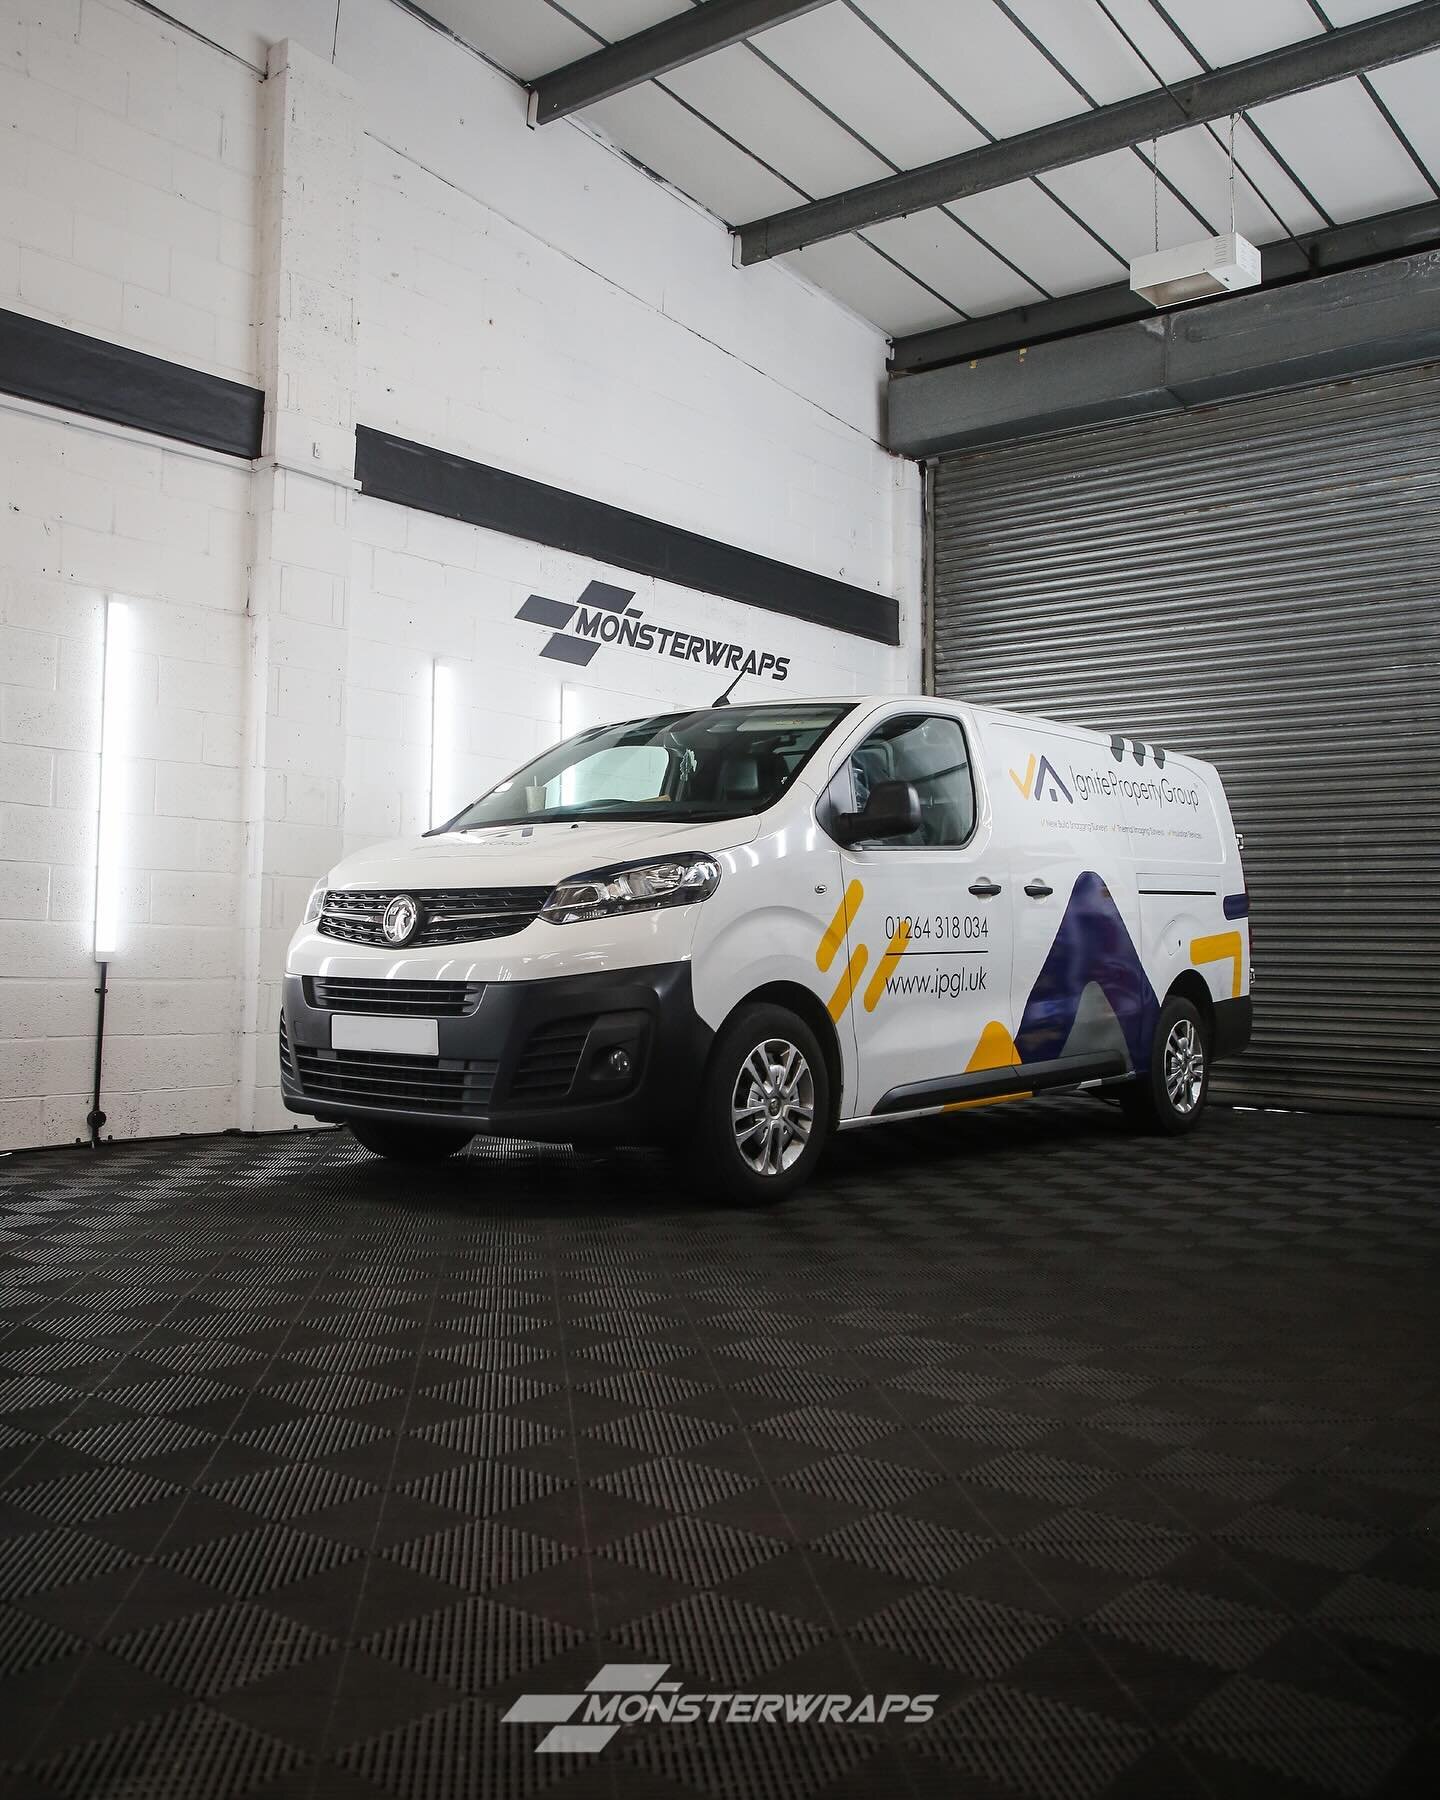 The first 2 of 5 Ignite Property Group vans branded up with their new graphics, and don&rsquo;t they look the part! 🤩👏

Not only did we create this design all in-house, the team were able to turn each van around in a day! 💪Which makes the logistic